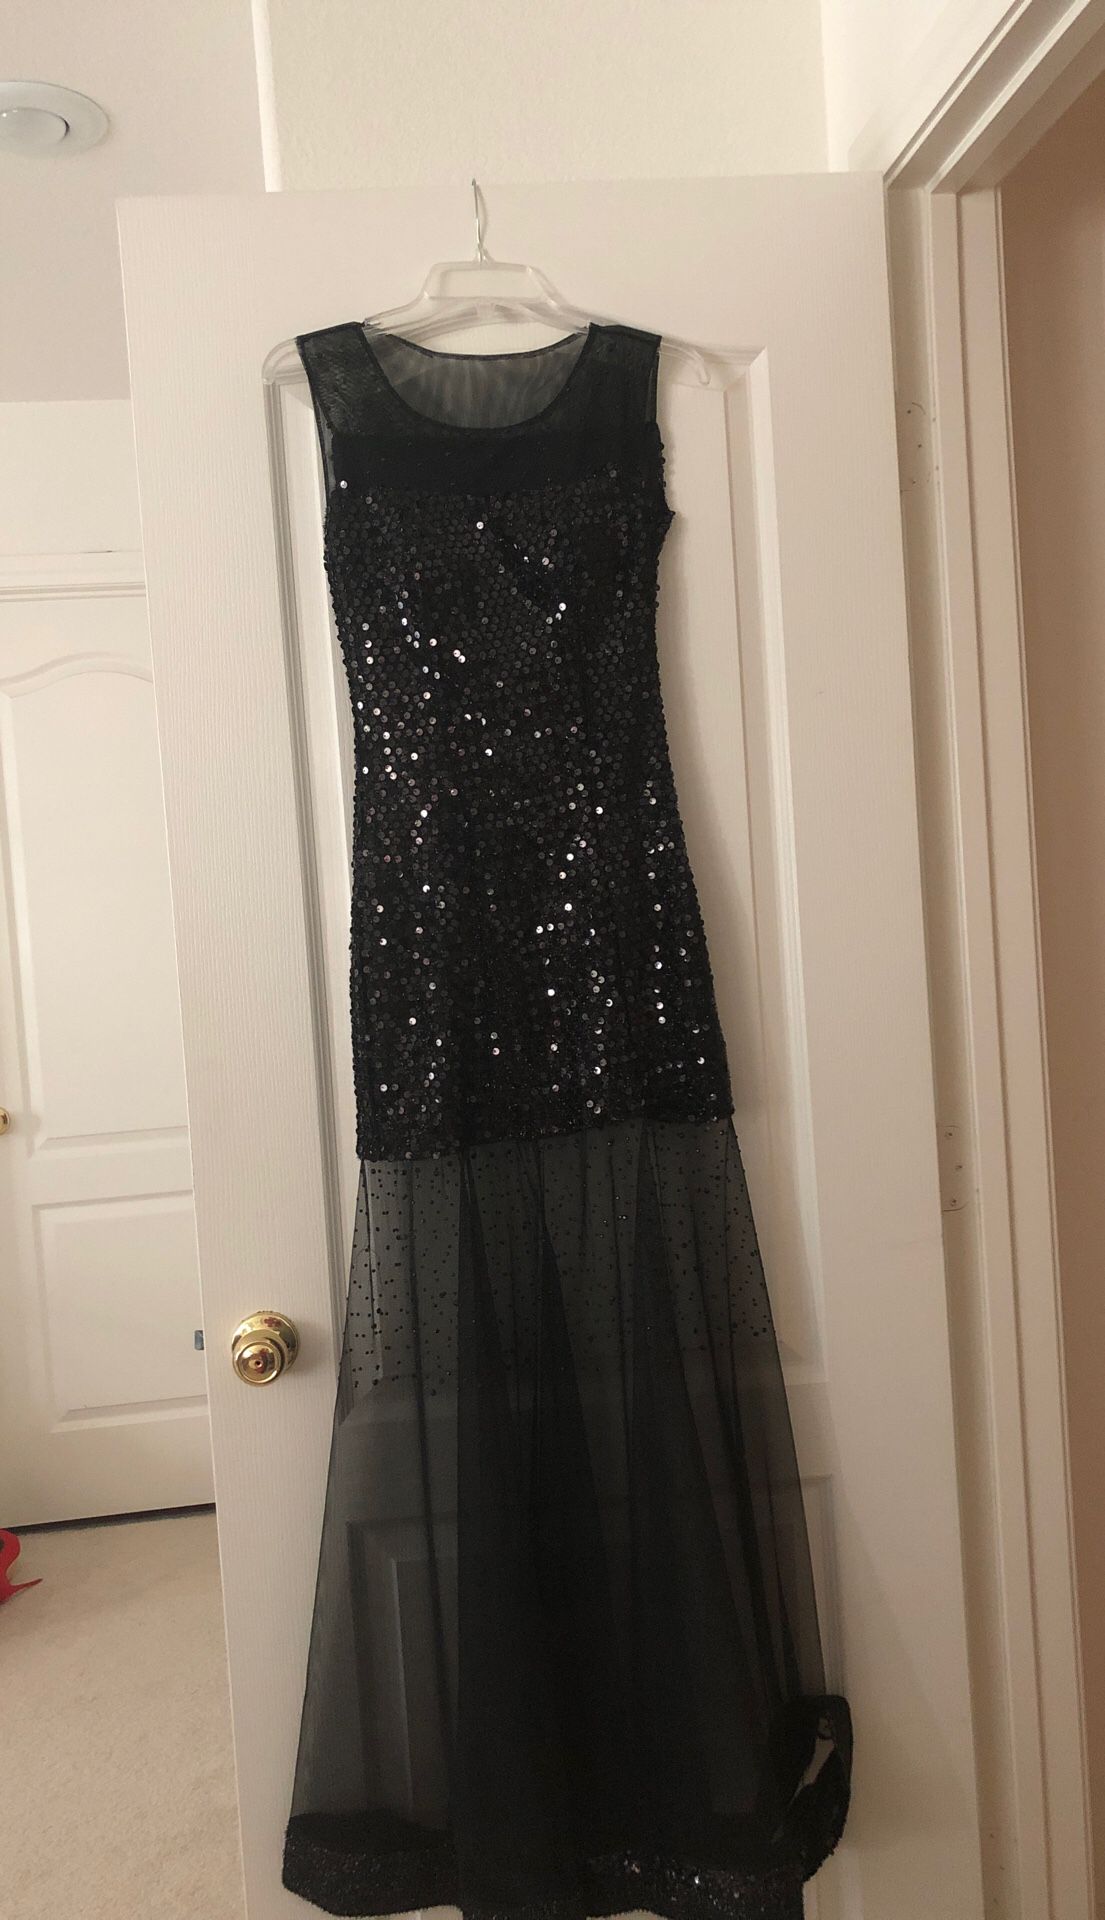 Evening or prom dress